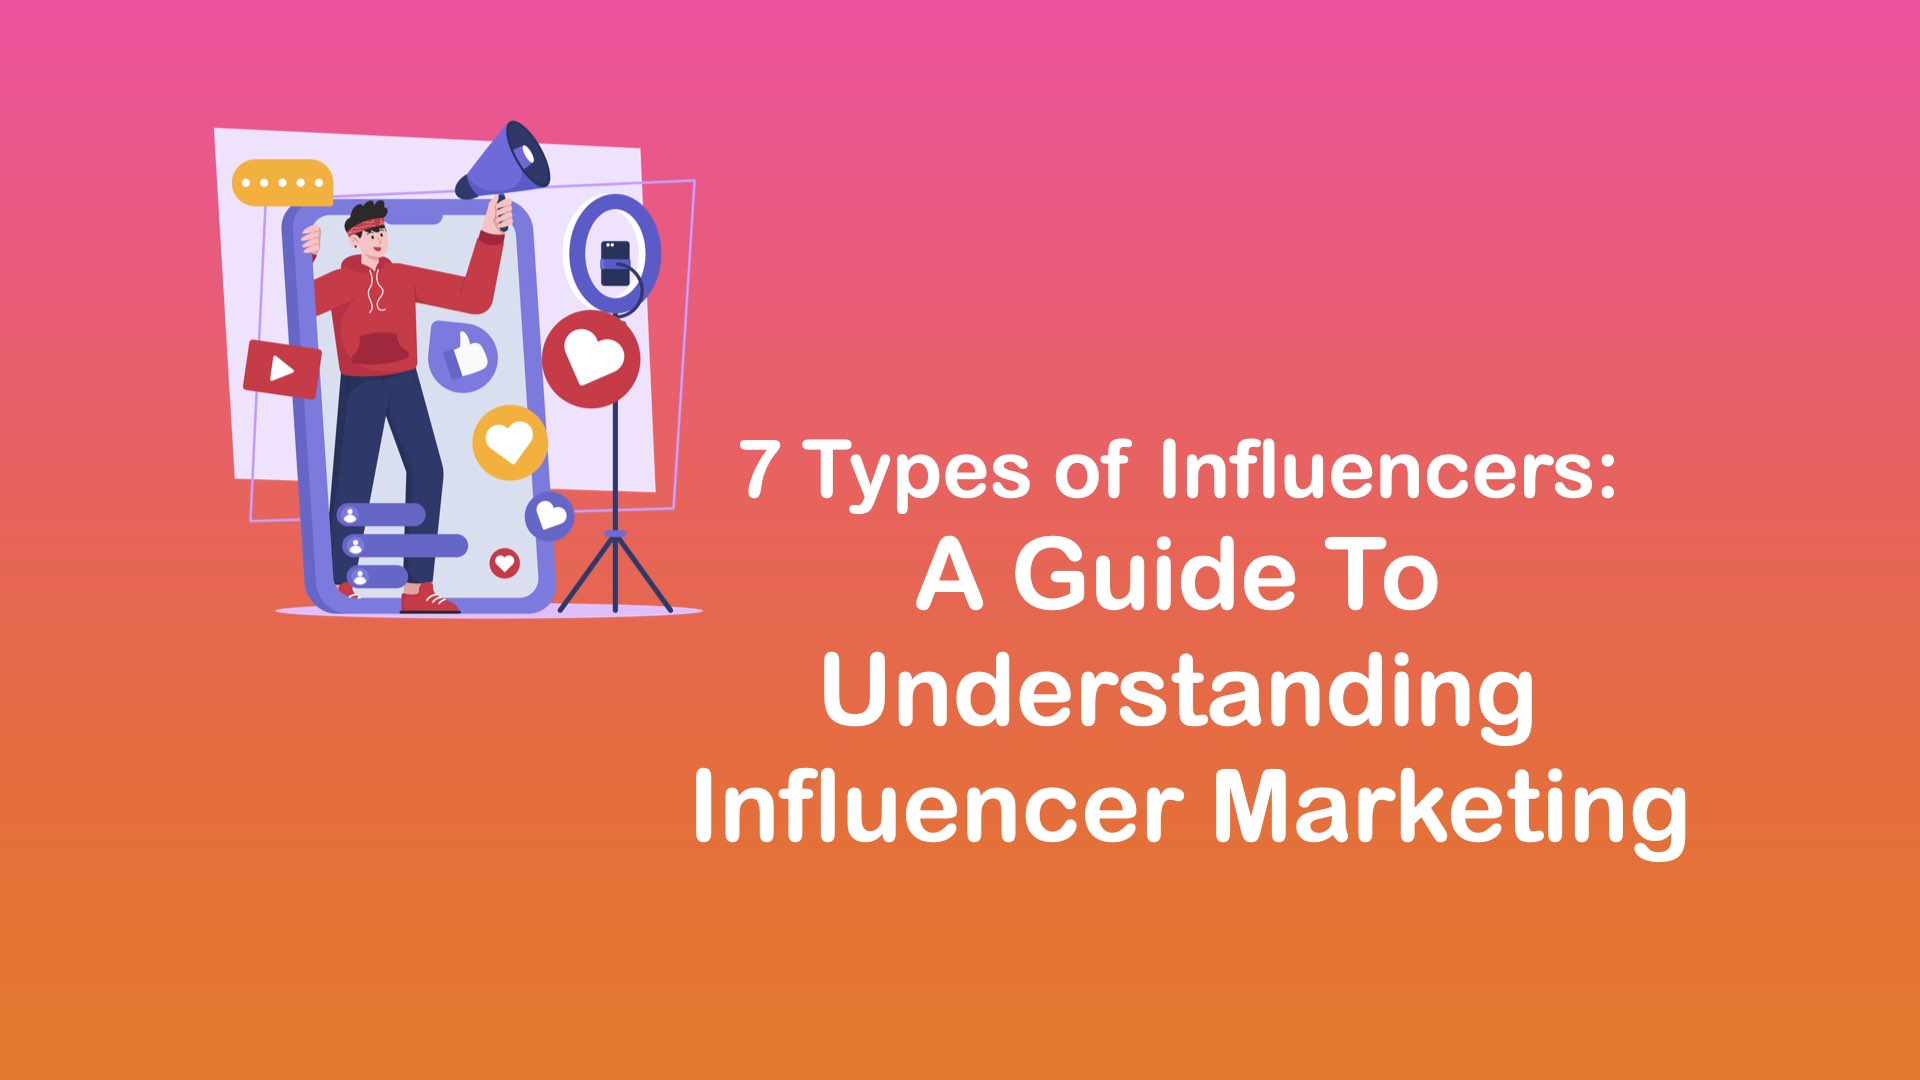 7 Types of Influencers: A Guide to Understanding Influencer Marketing